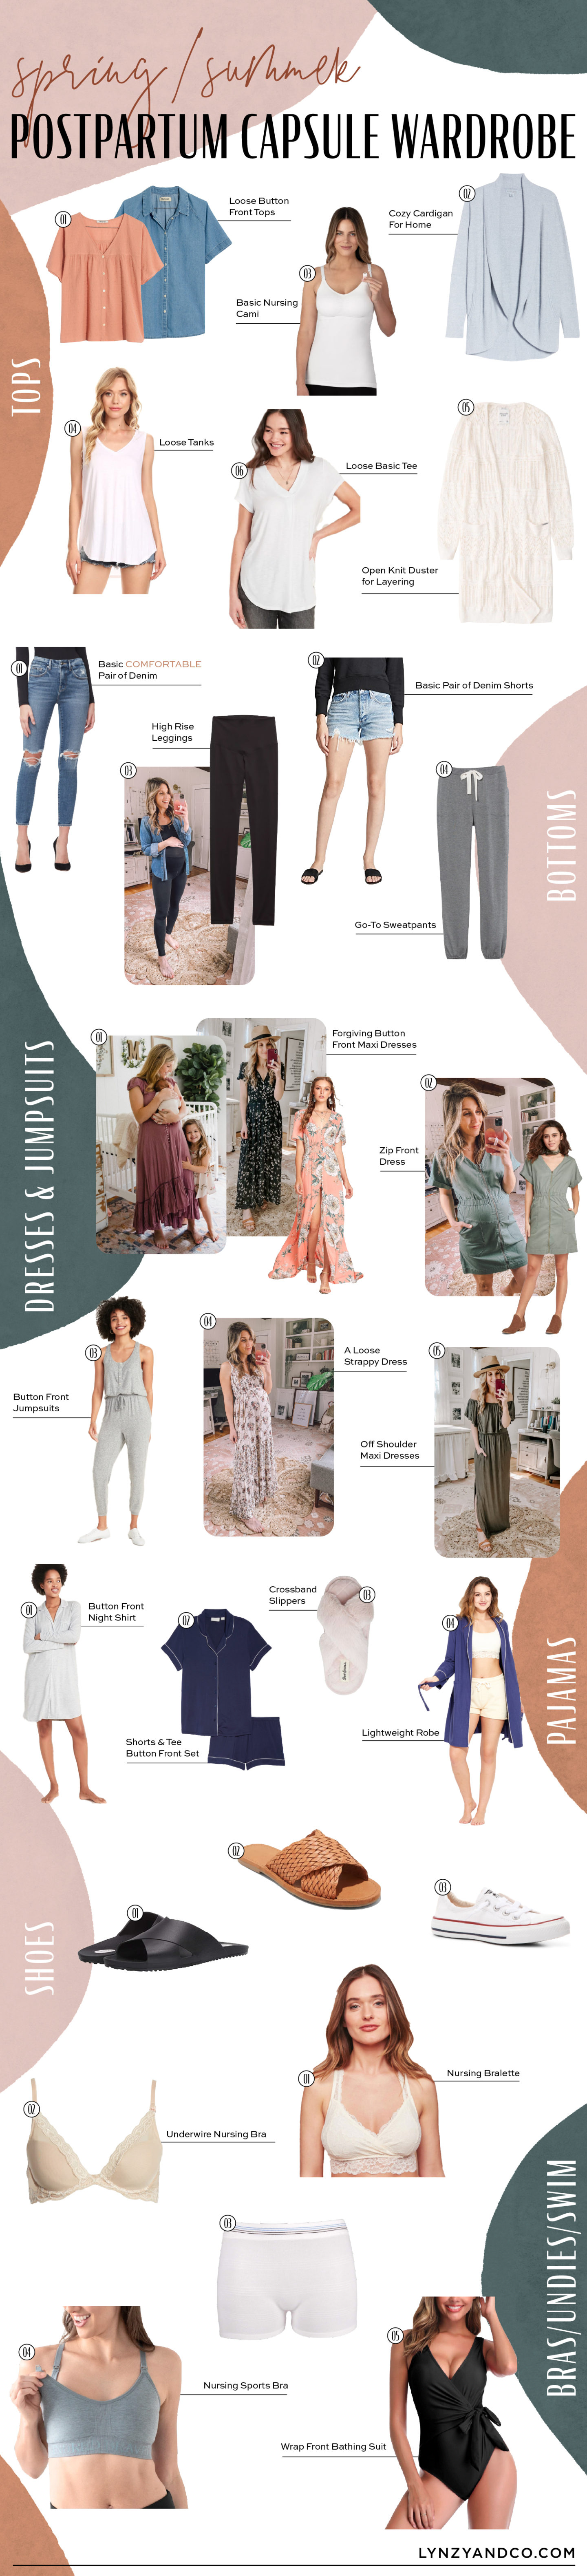 Postpartum Summer Clothes and Outfit Ideas from a Mom of 4 — A Mom Explores   Family Travel Tips, Destination Guides with Kids, Family Vacation Ideas,  and more!